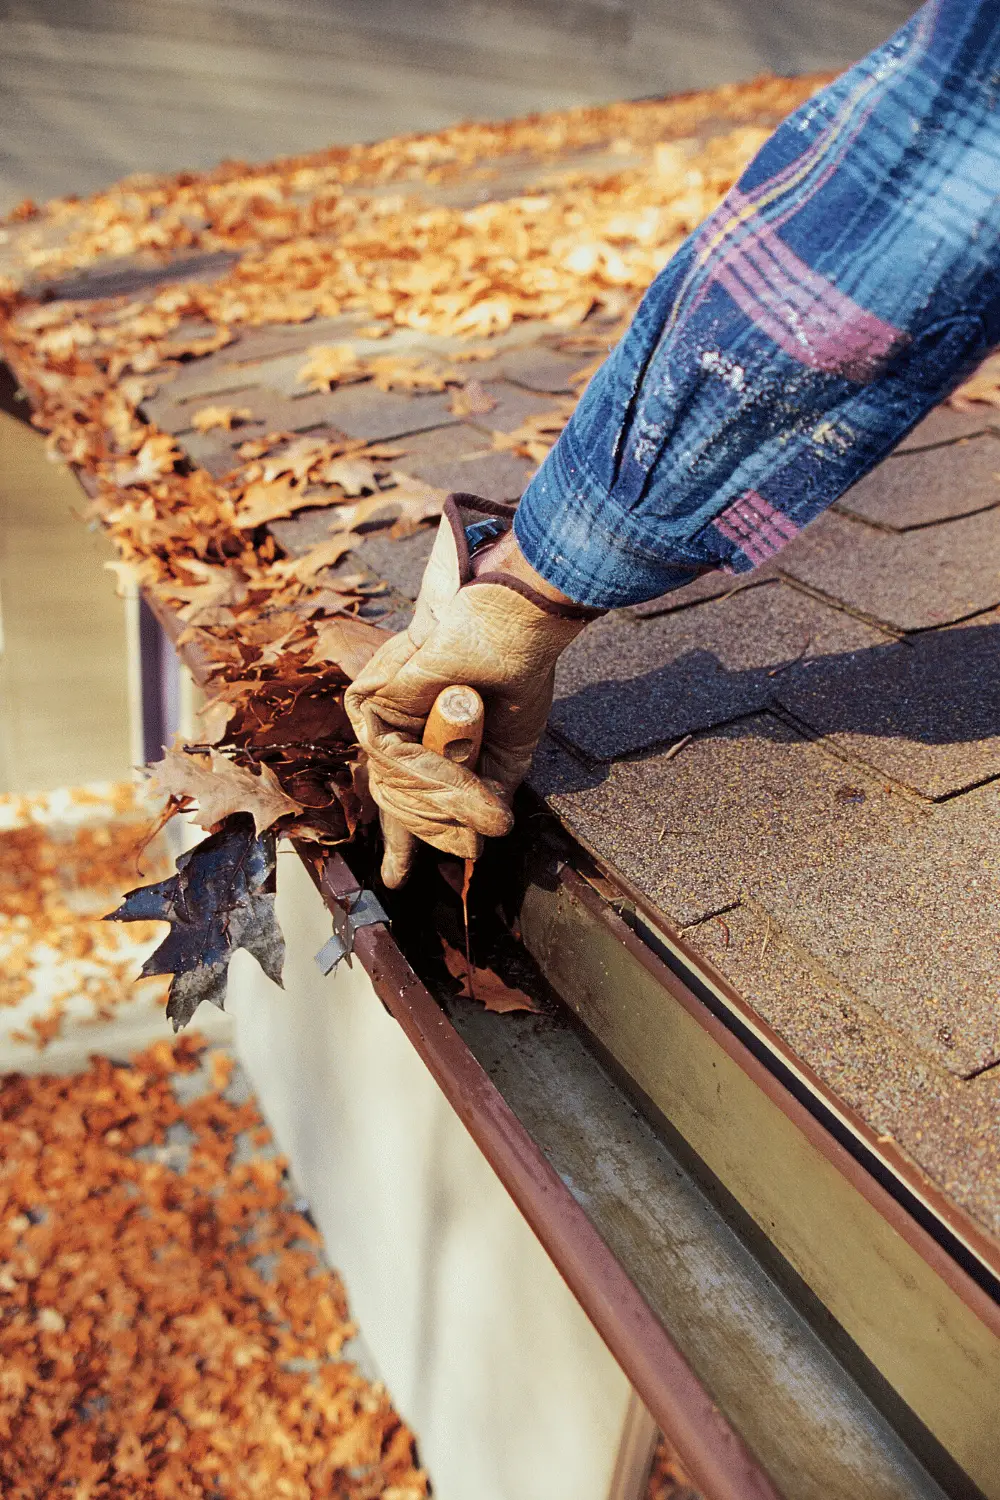 Keep Your Home Running Efficiently With These Maintenance Tips